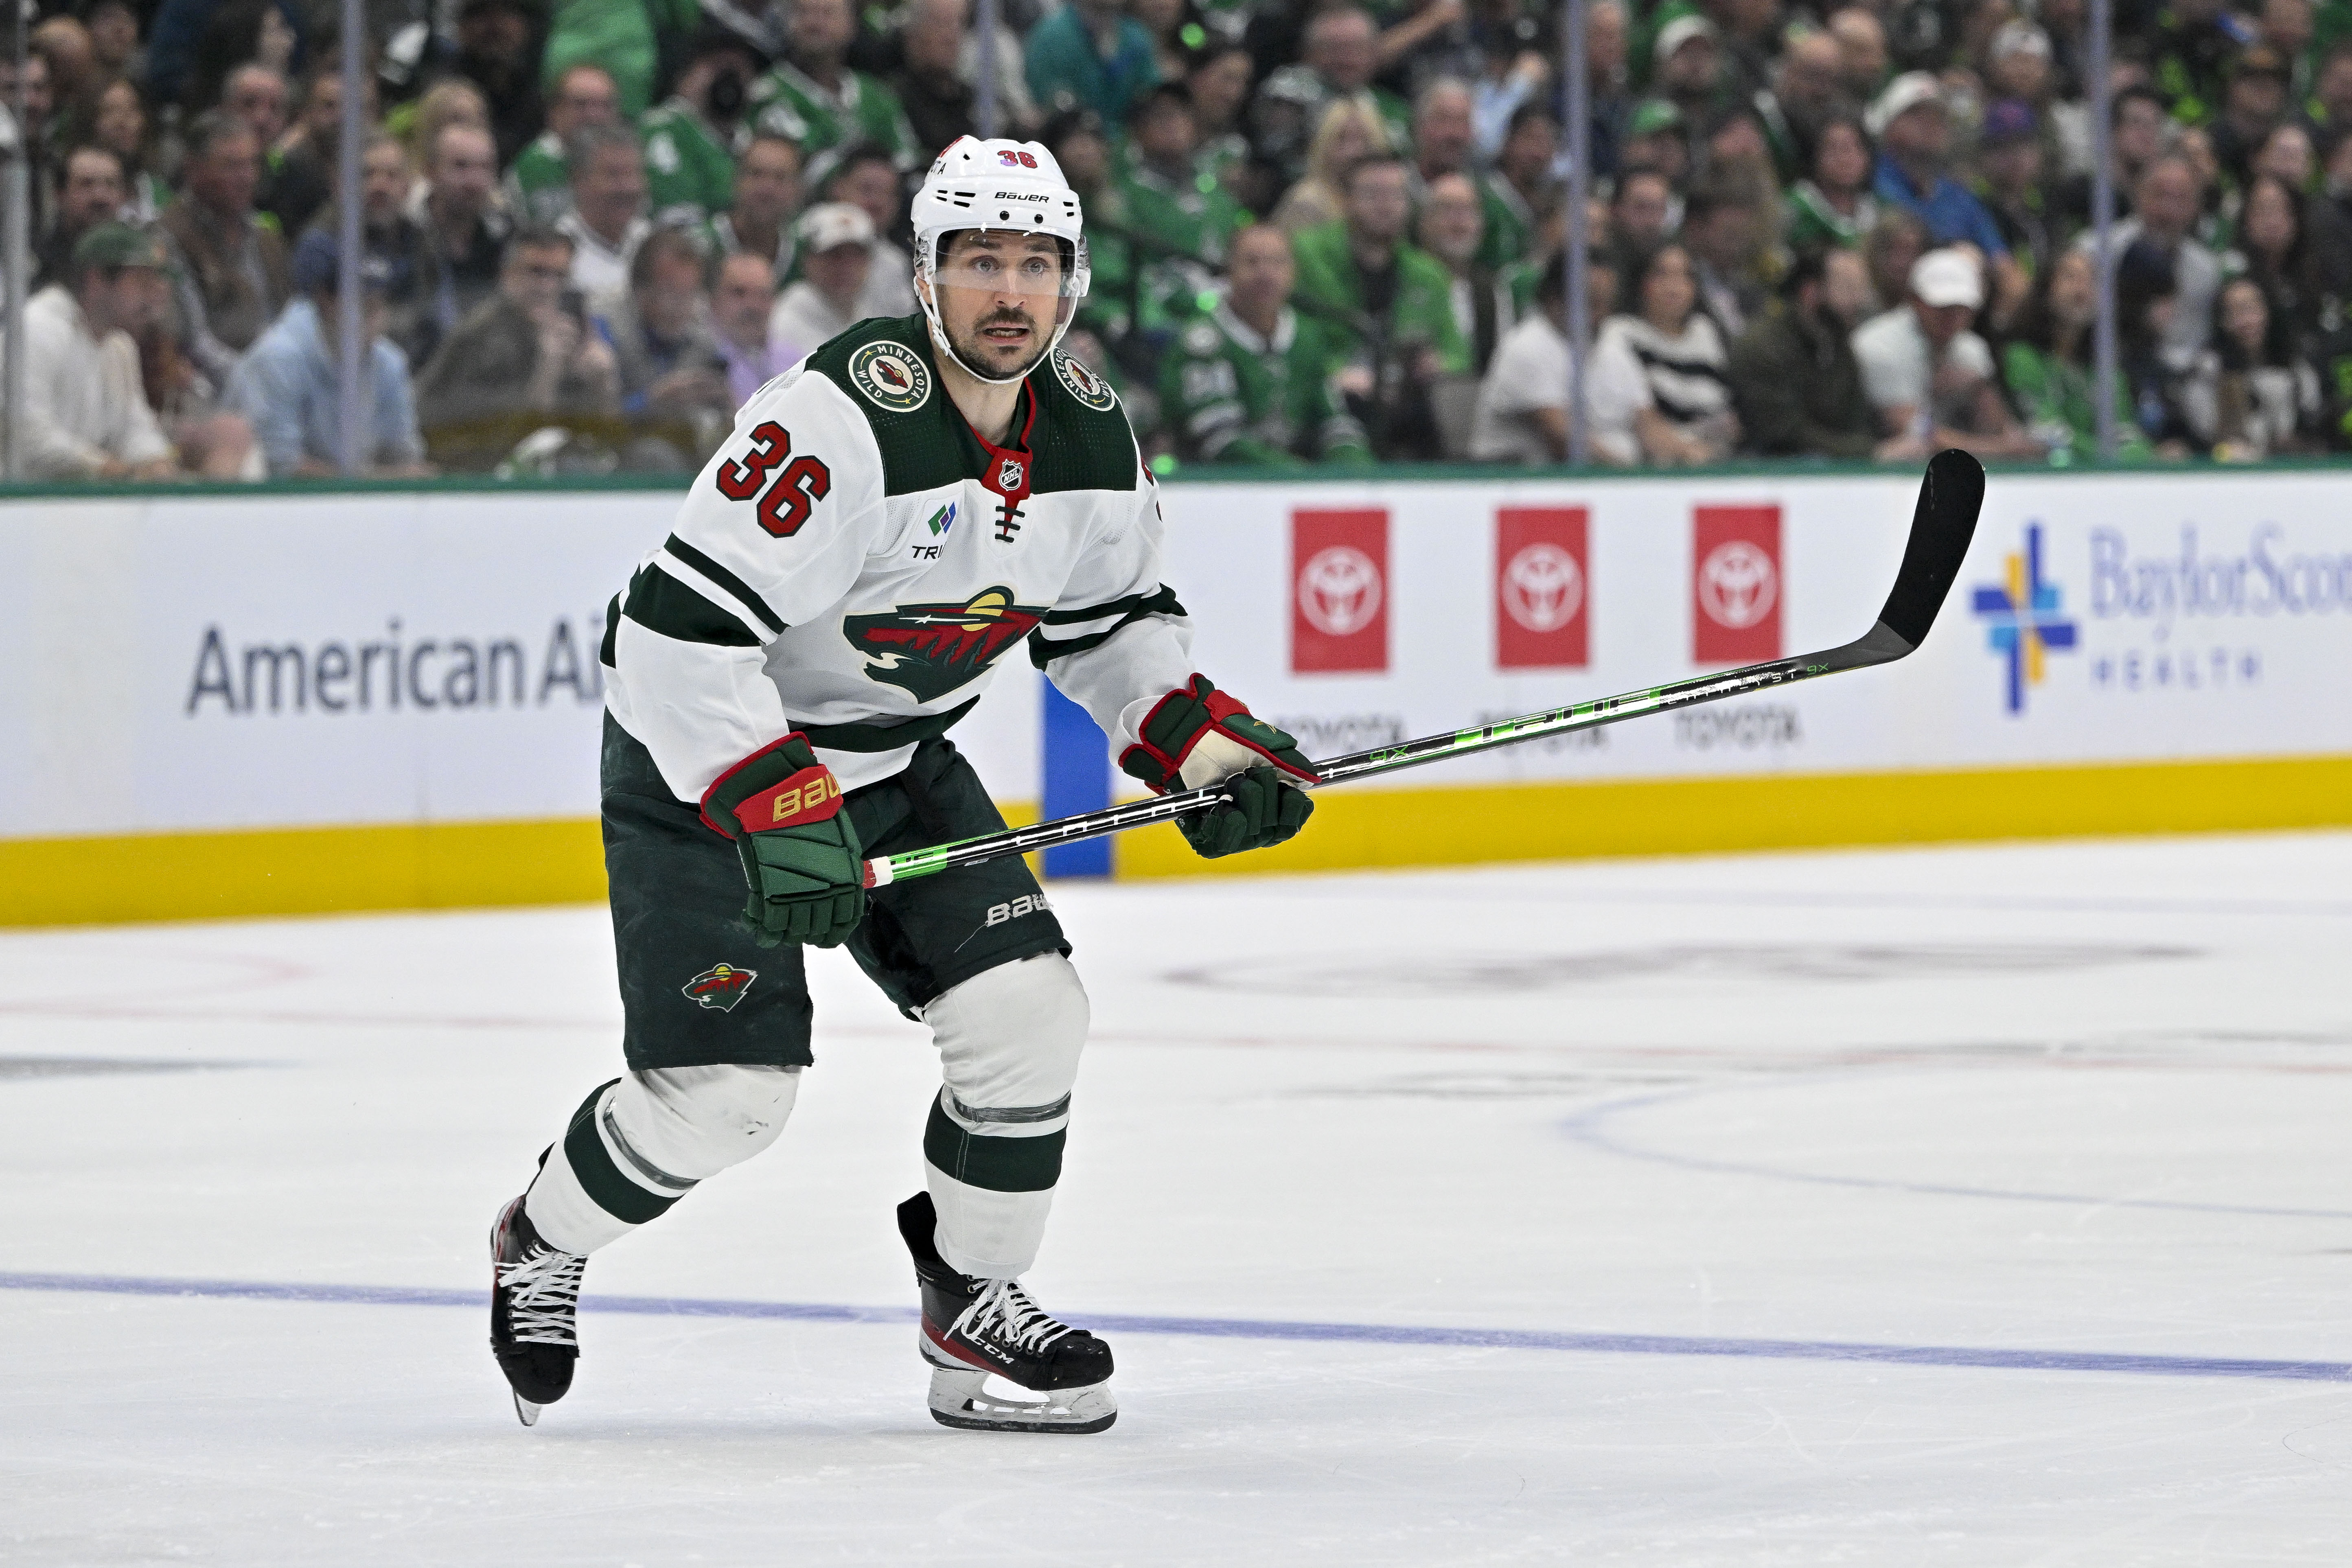 Two Minnesota Wild Players Land on the NHL All Star Team